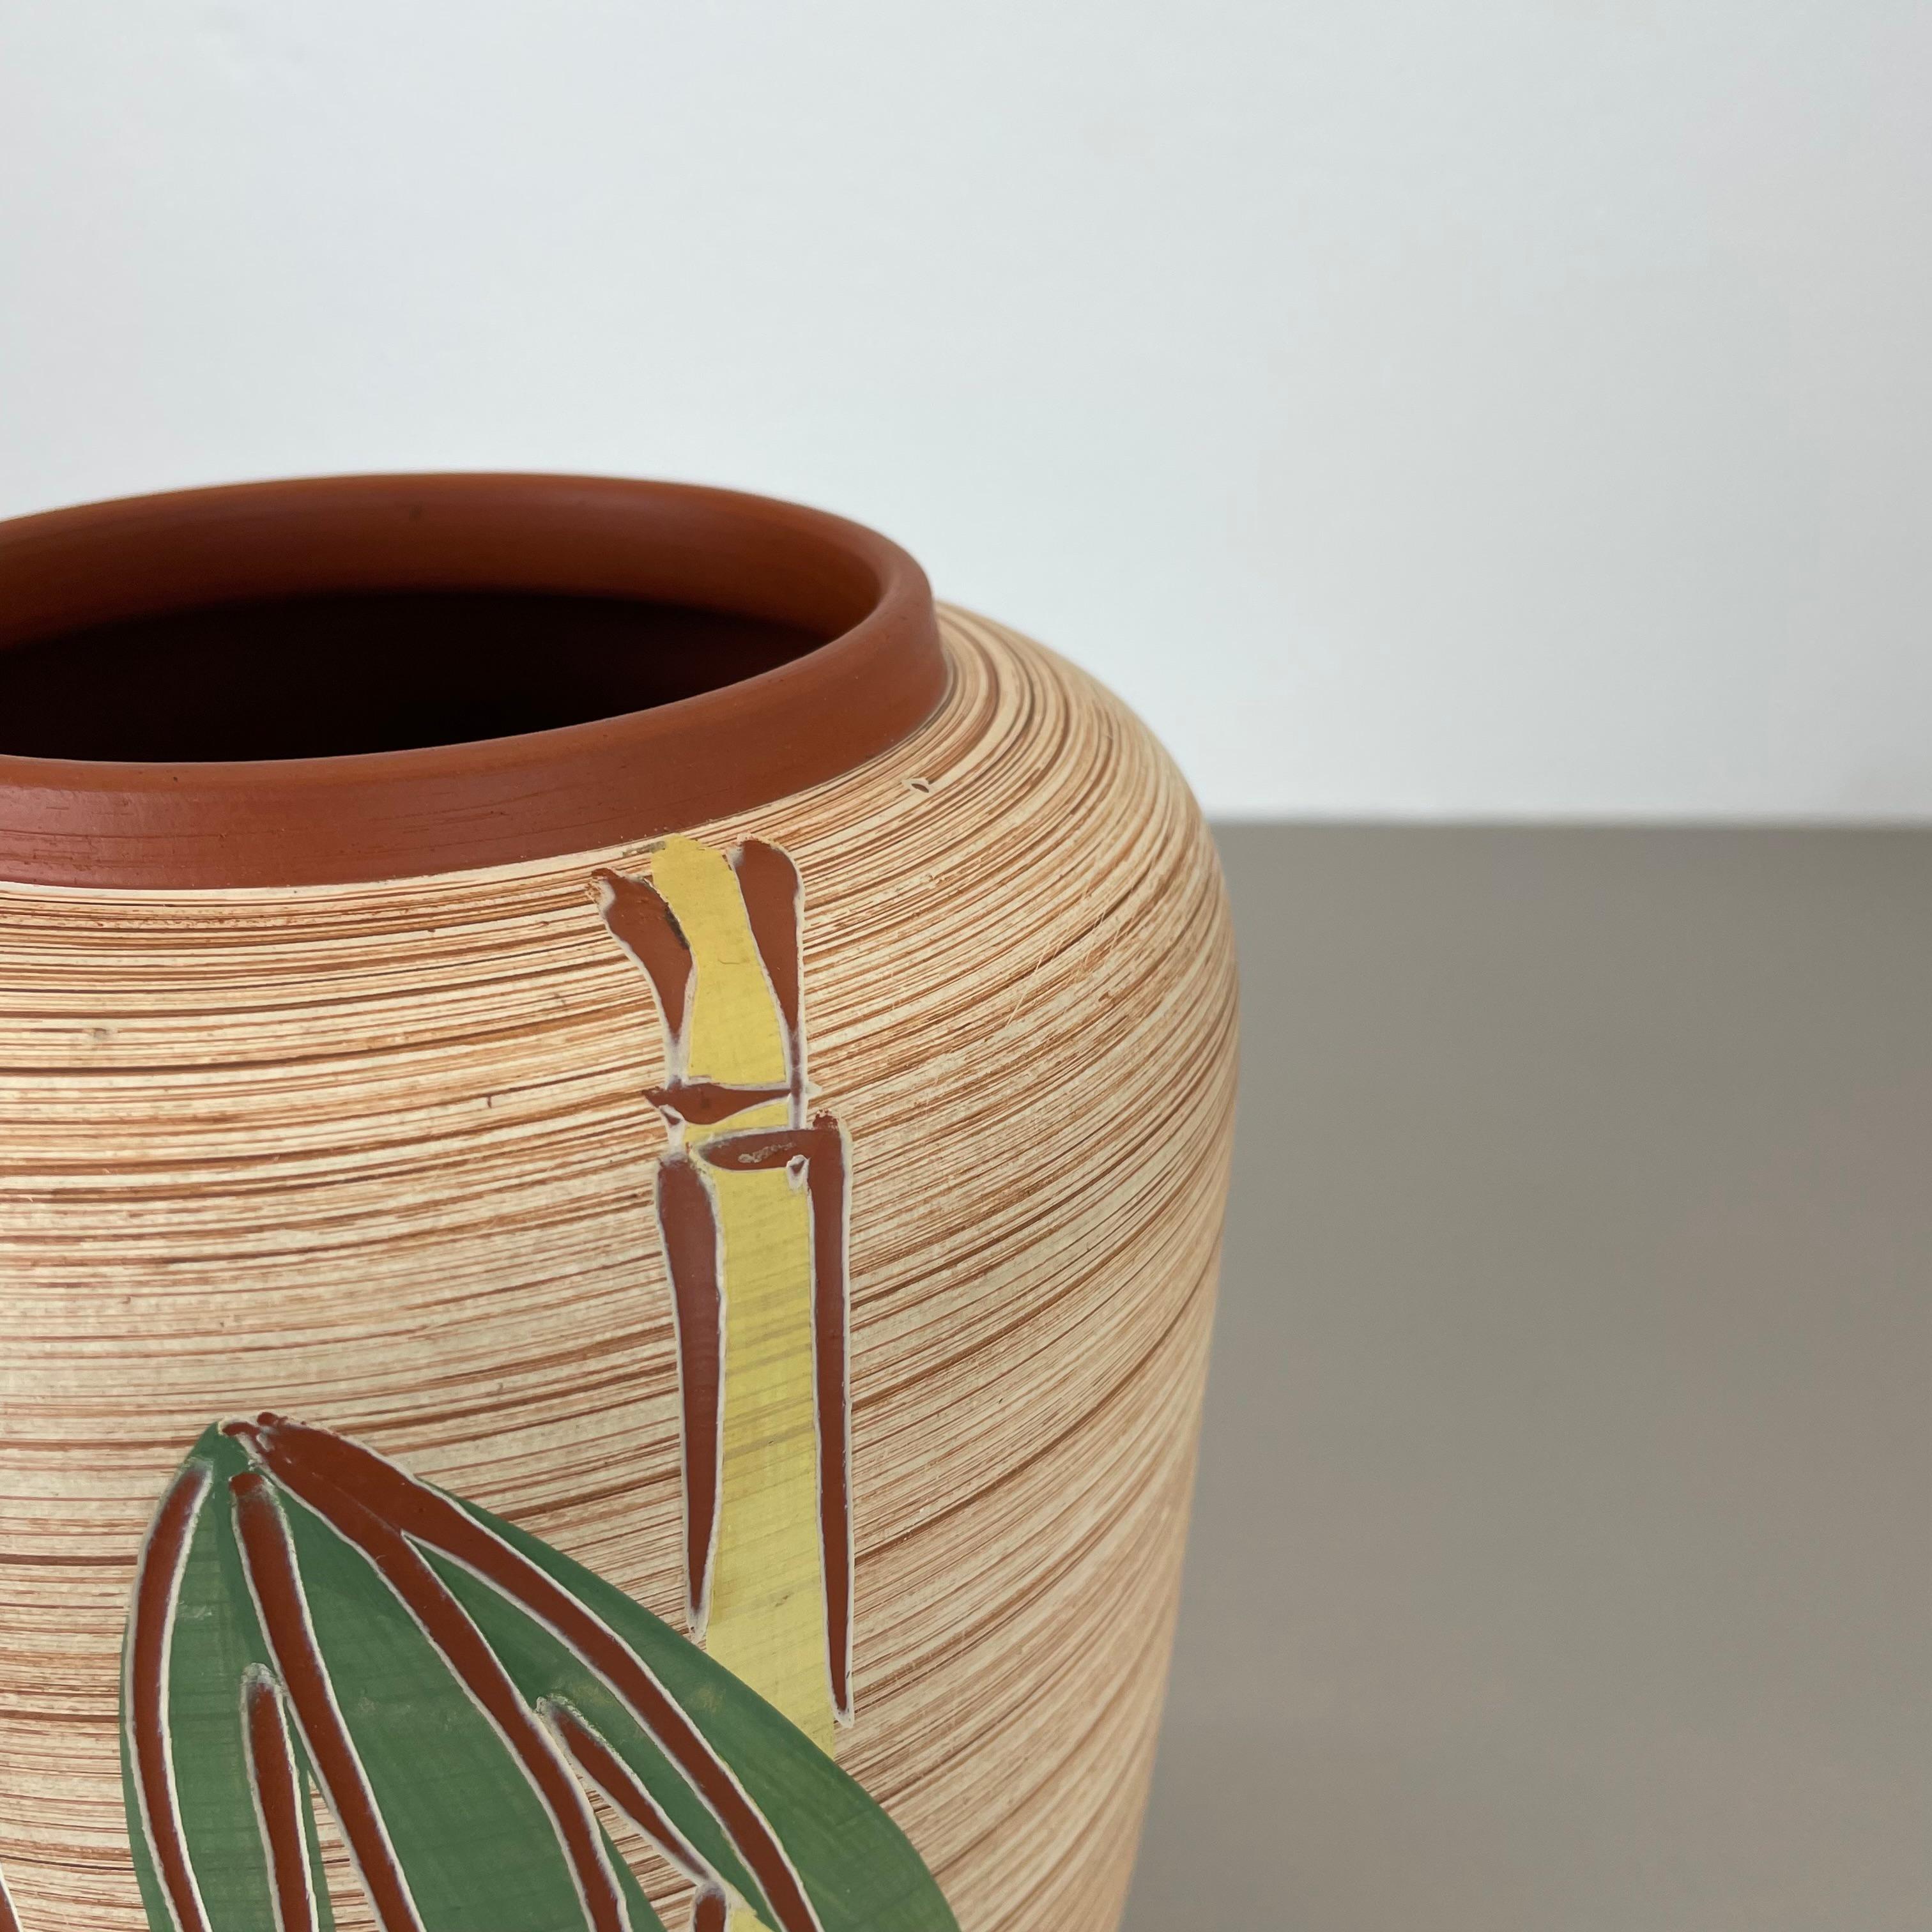 Colorful Abstract BAMBOO Ceramic Pottery Vase by EIWA Ceramics, Germany 1950s For Sale 2